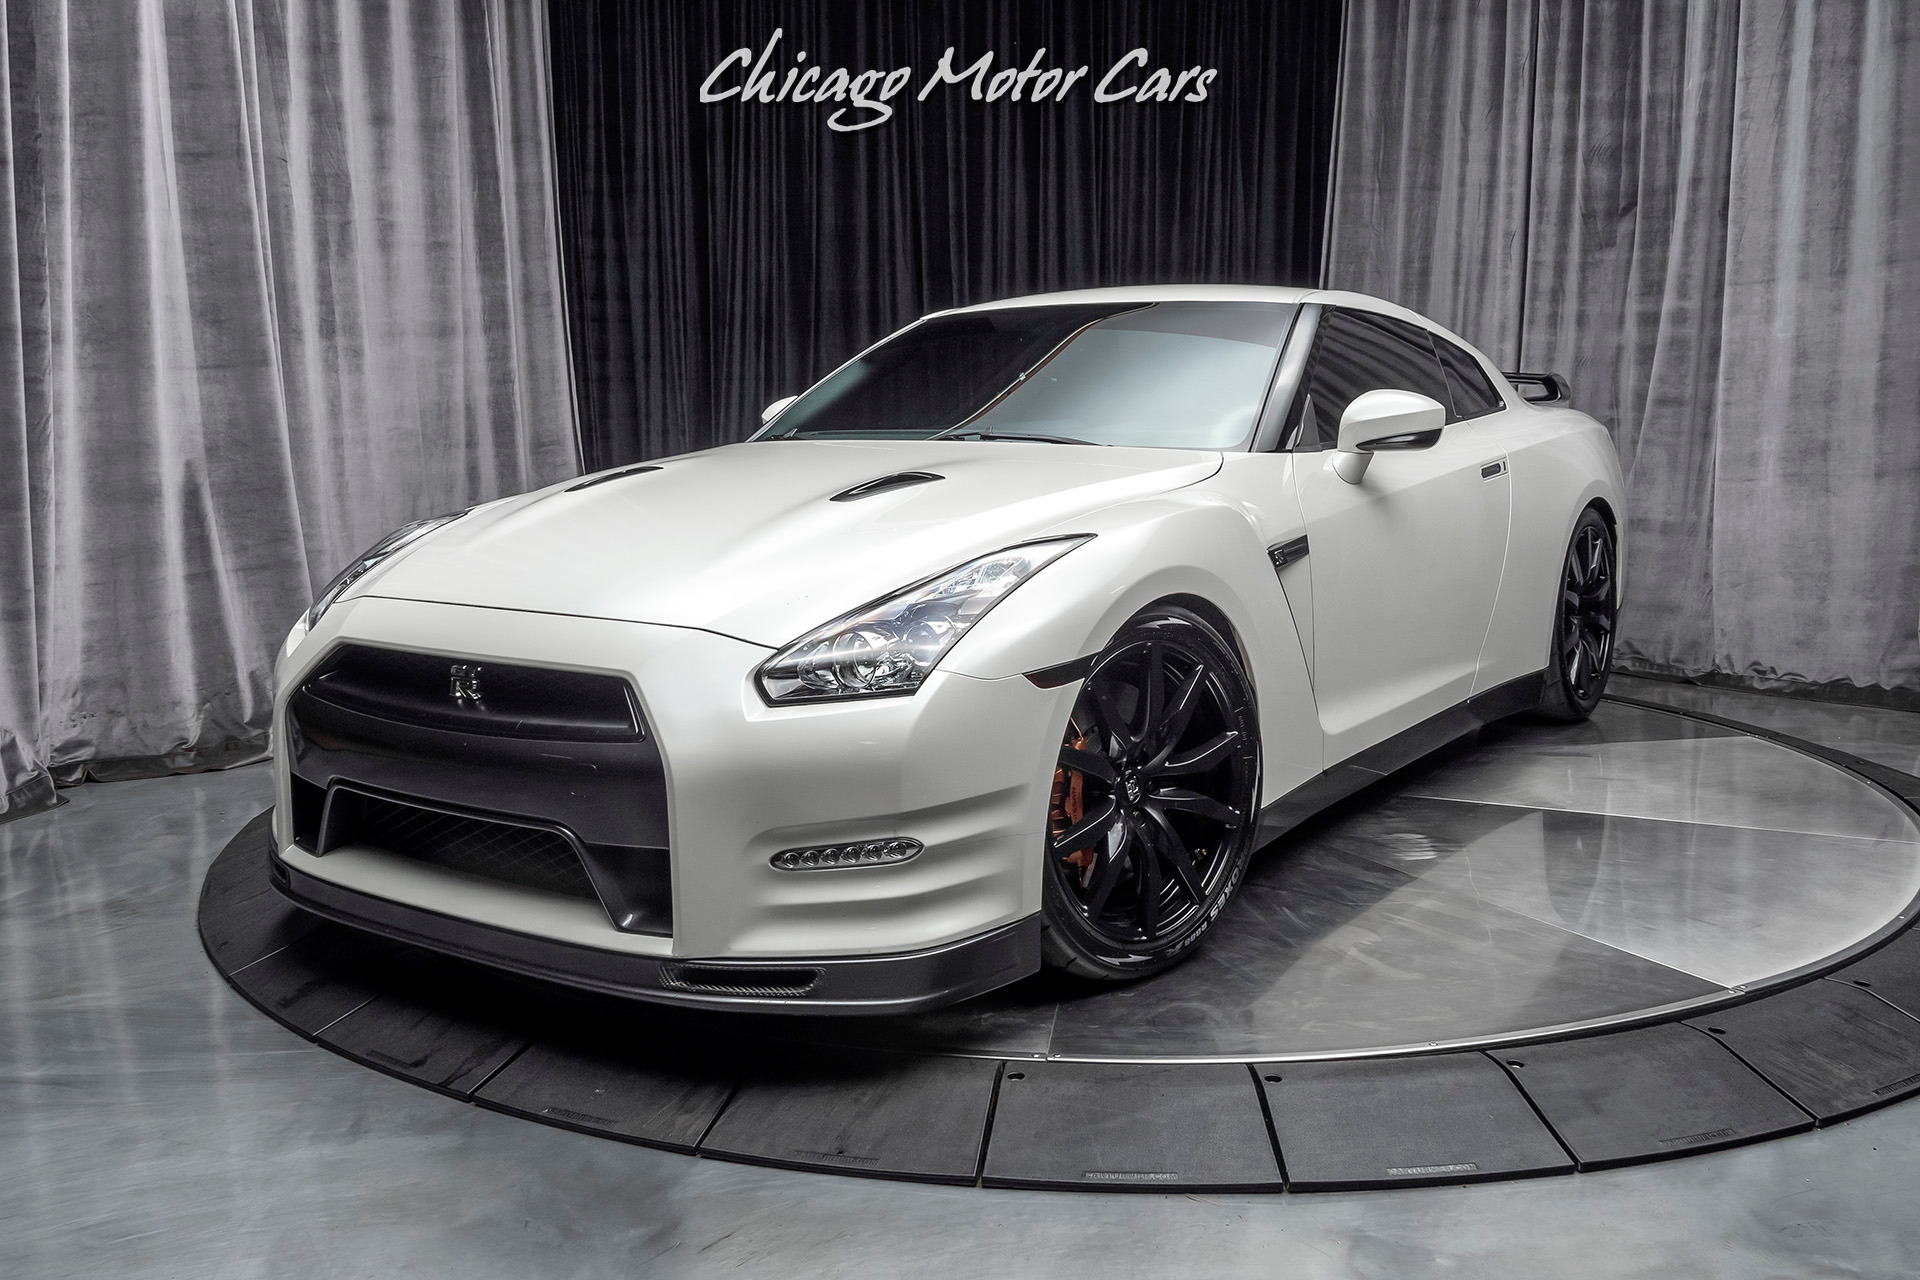 Used 2013 Nissan GTR Premium 850HP Over 46k+ in Receipts